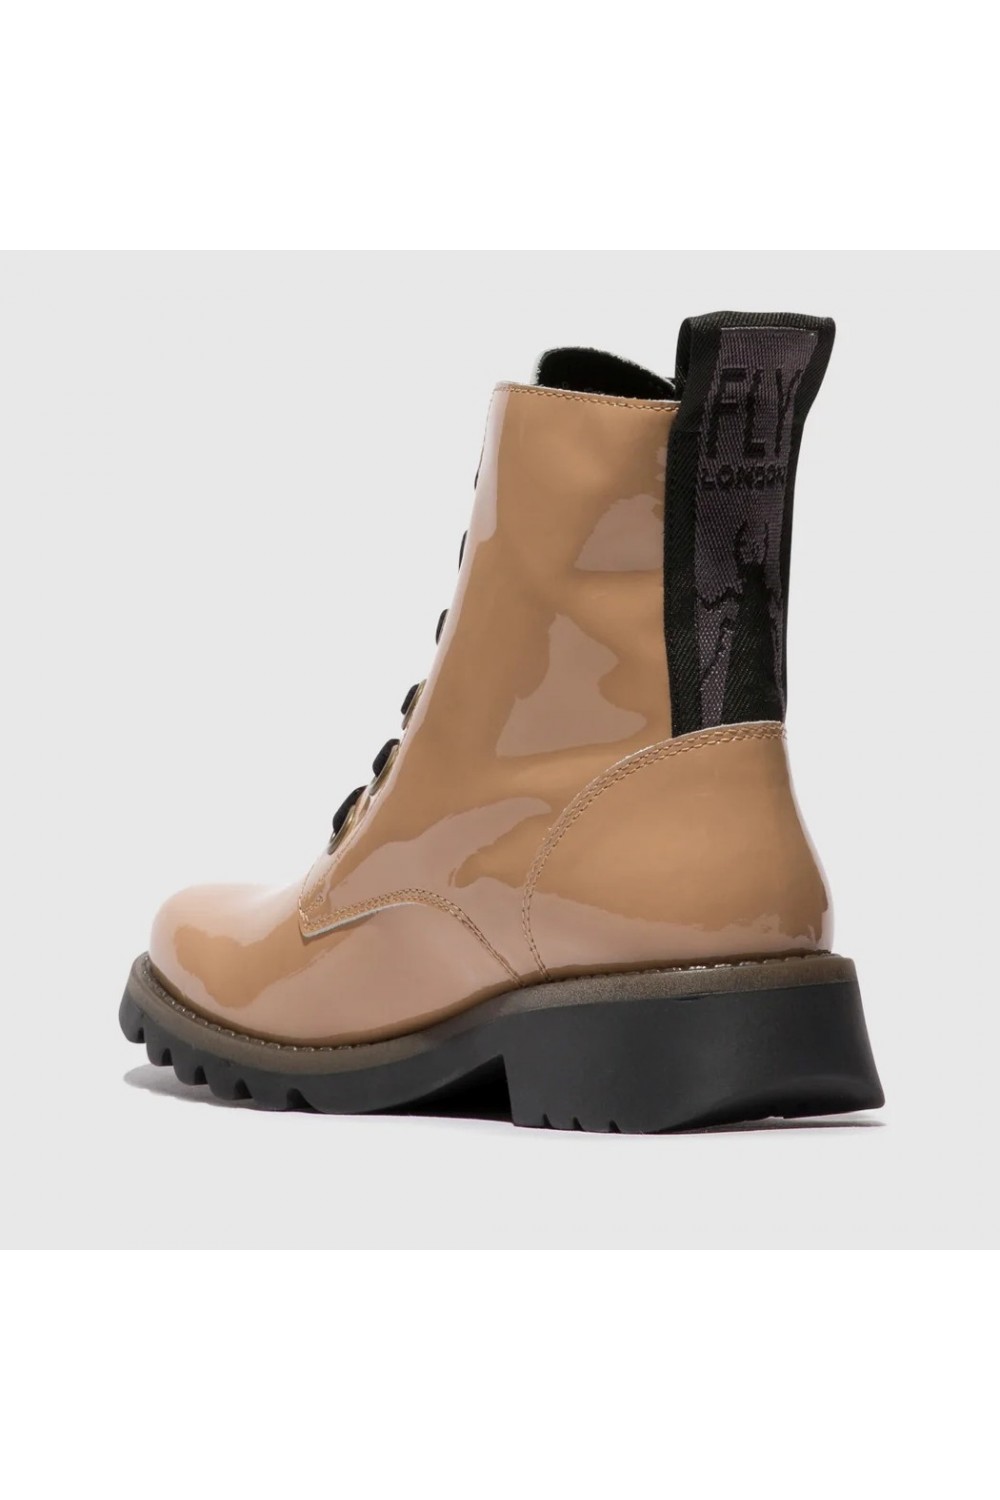 FLY LONDON Ragi539 Military Style Lace Up Boot Capuccino Patent Leather